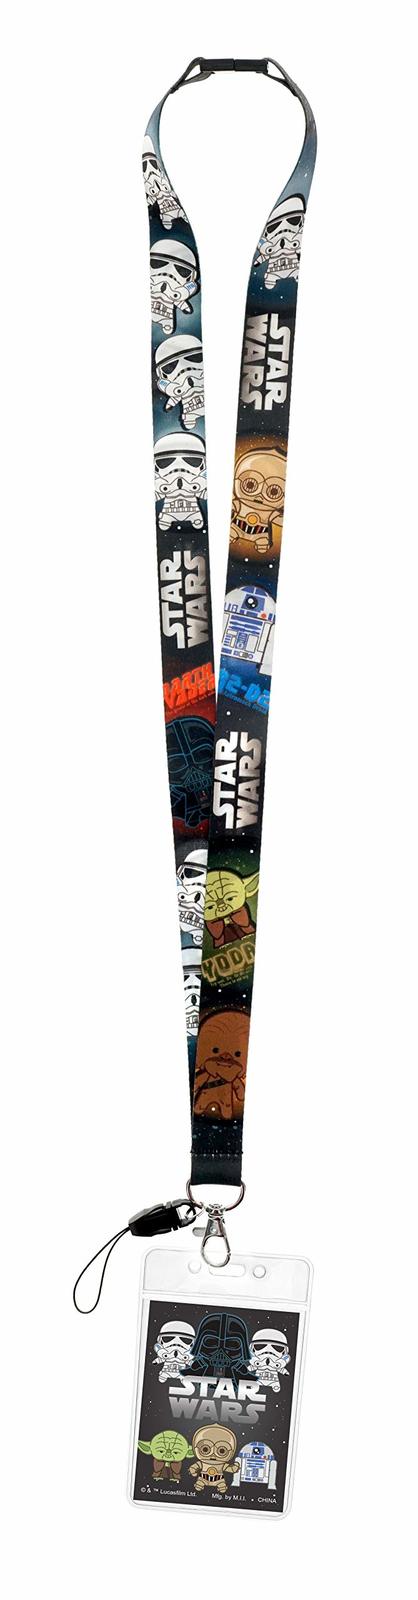 Primary image for Star Wars Lanyard